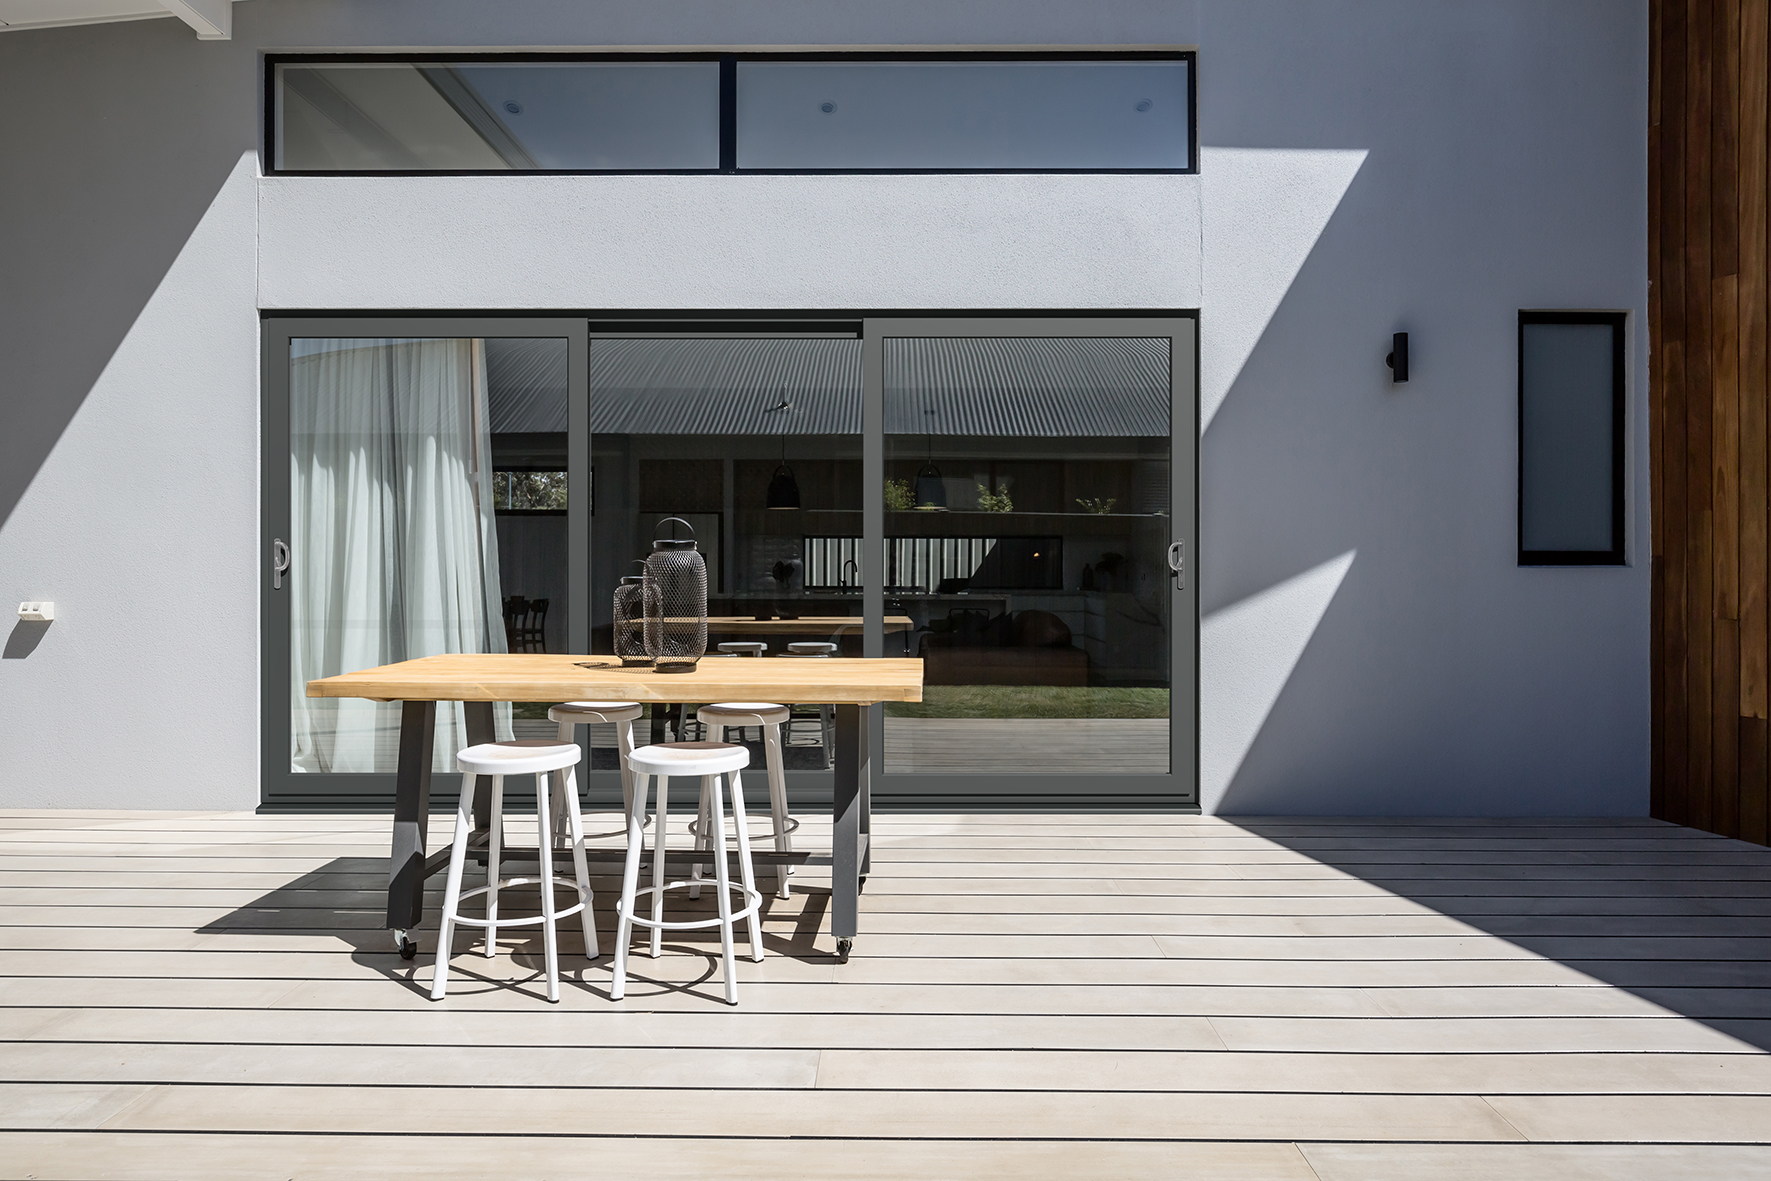 Eurocell has always led the way in patio door design. In fact, we’ve long been the customer’s choice when it comes to security, strength and performance that never compromises on design. @eurocellplc